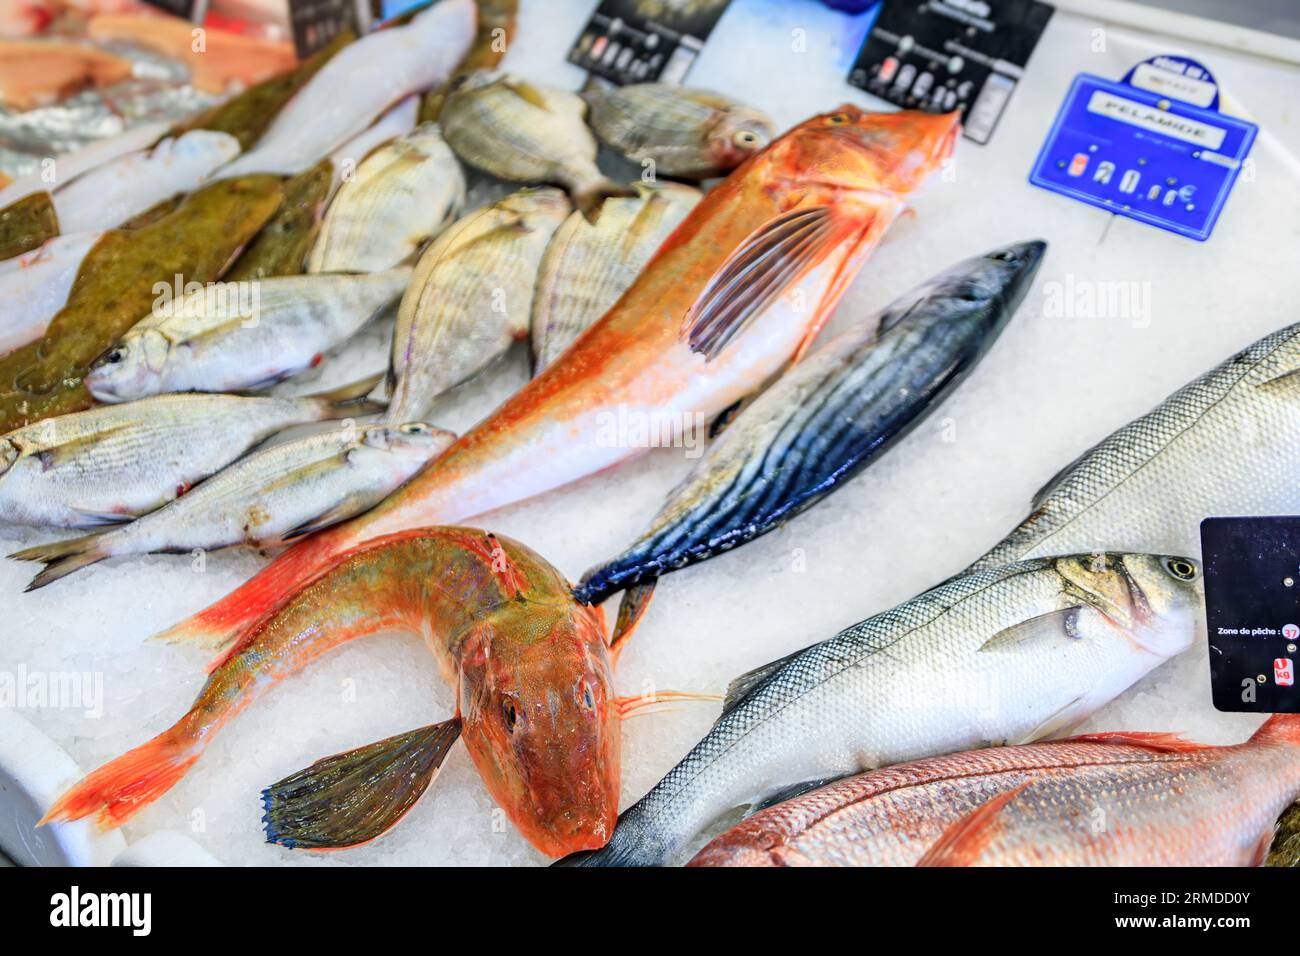 Freshly caught fish on display at the fish market in the Old Town, Vieille Ville in Menton, French Riviera, South of France Stock Photo